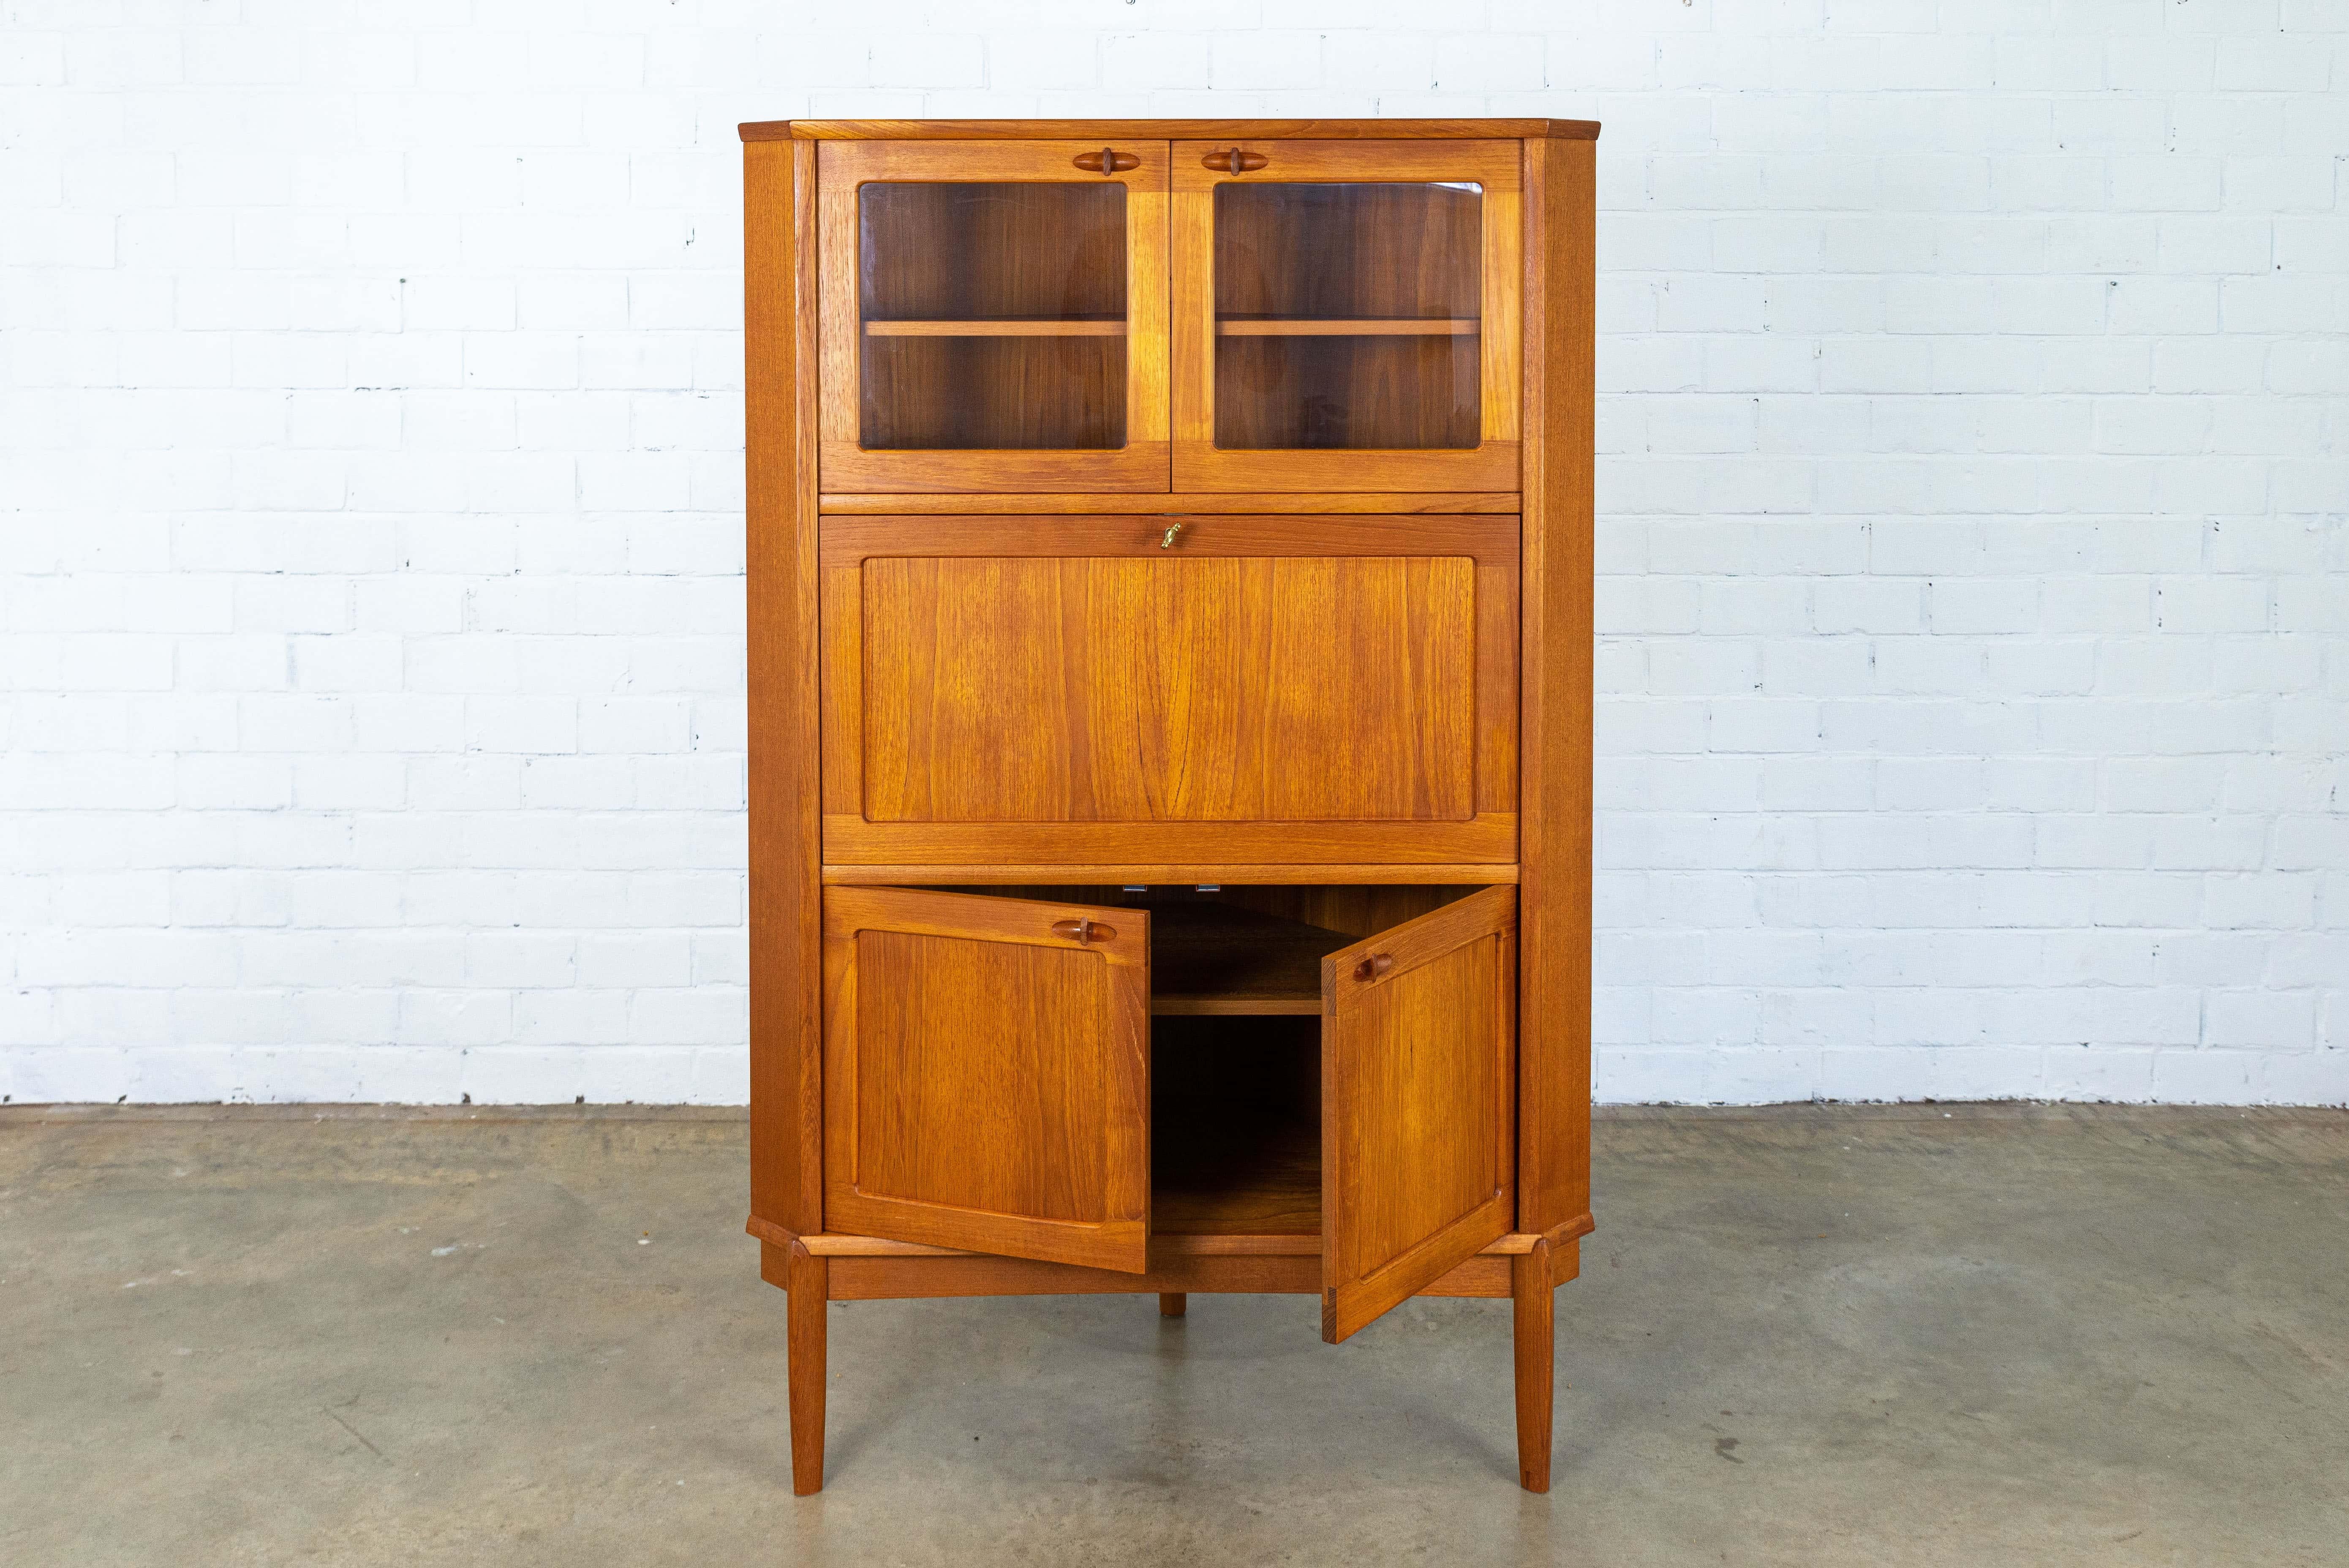 Beautiful corner cabinet produced in the 1960s for Bramin and designed by H.W. Small. The cupboard has a bar area, display case and lots of storage space. Very nicely designed base.
Original piece.